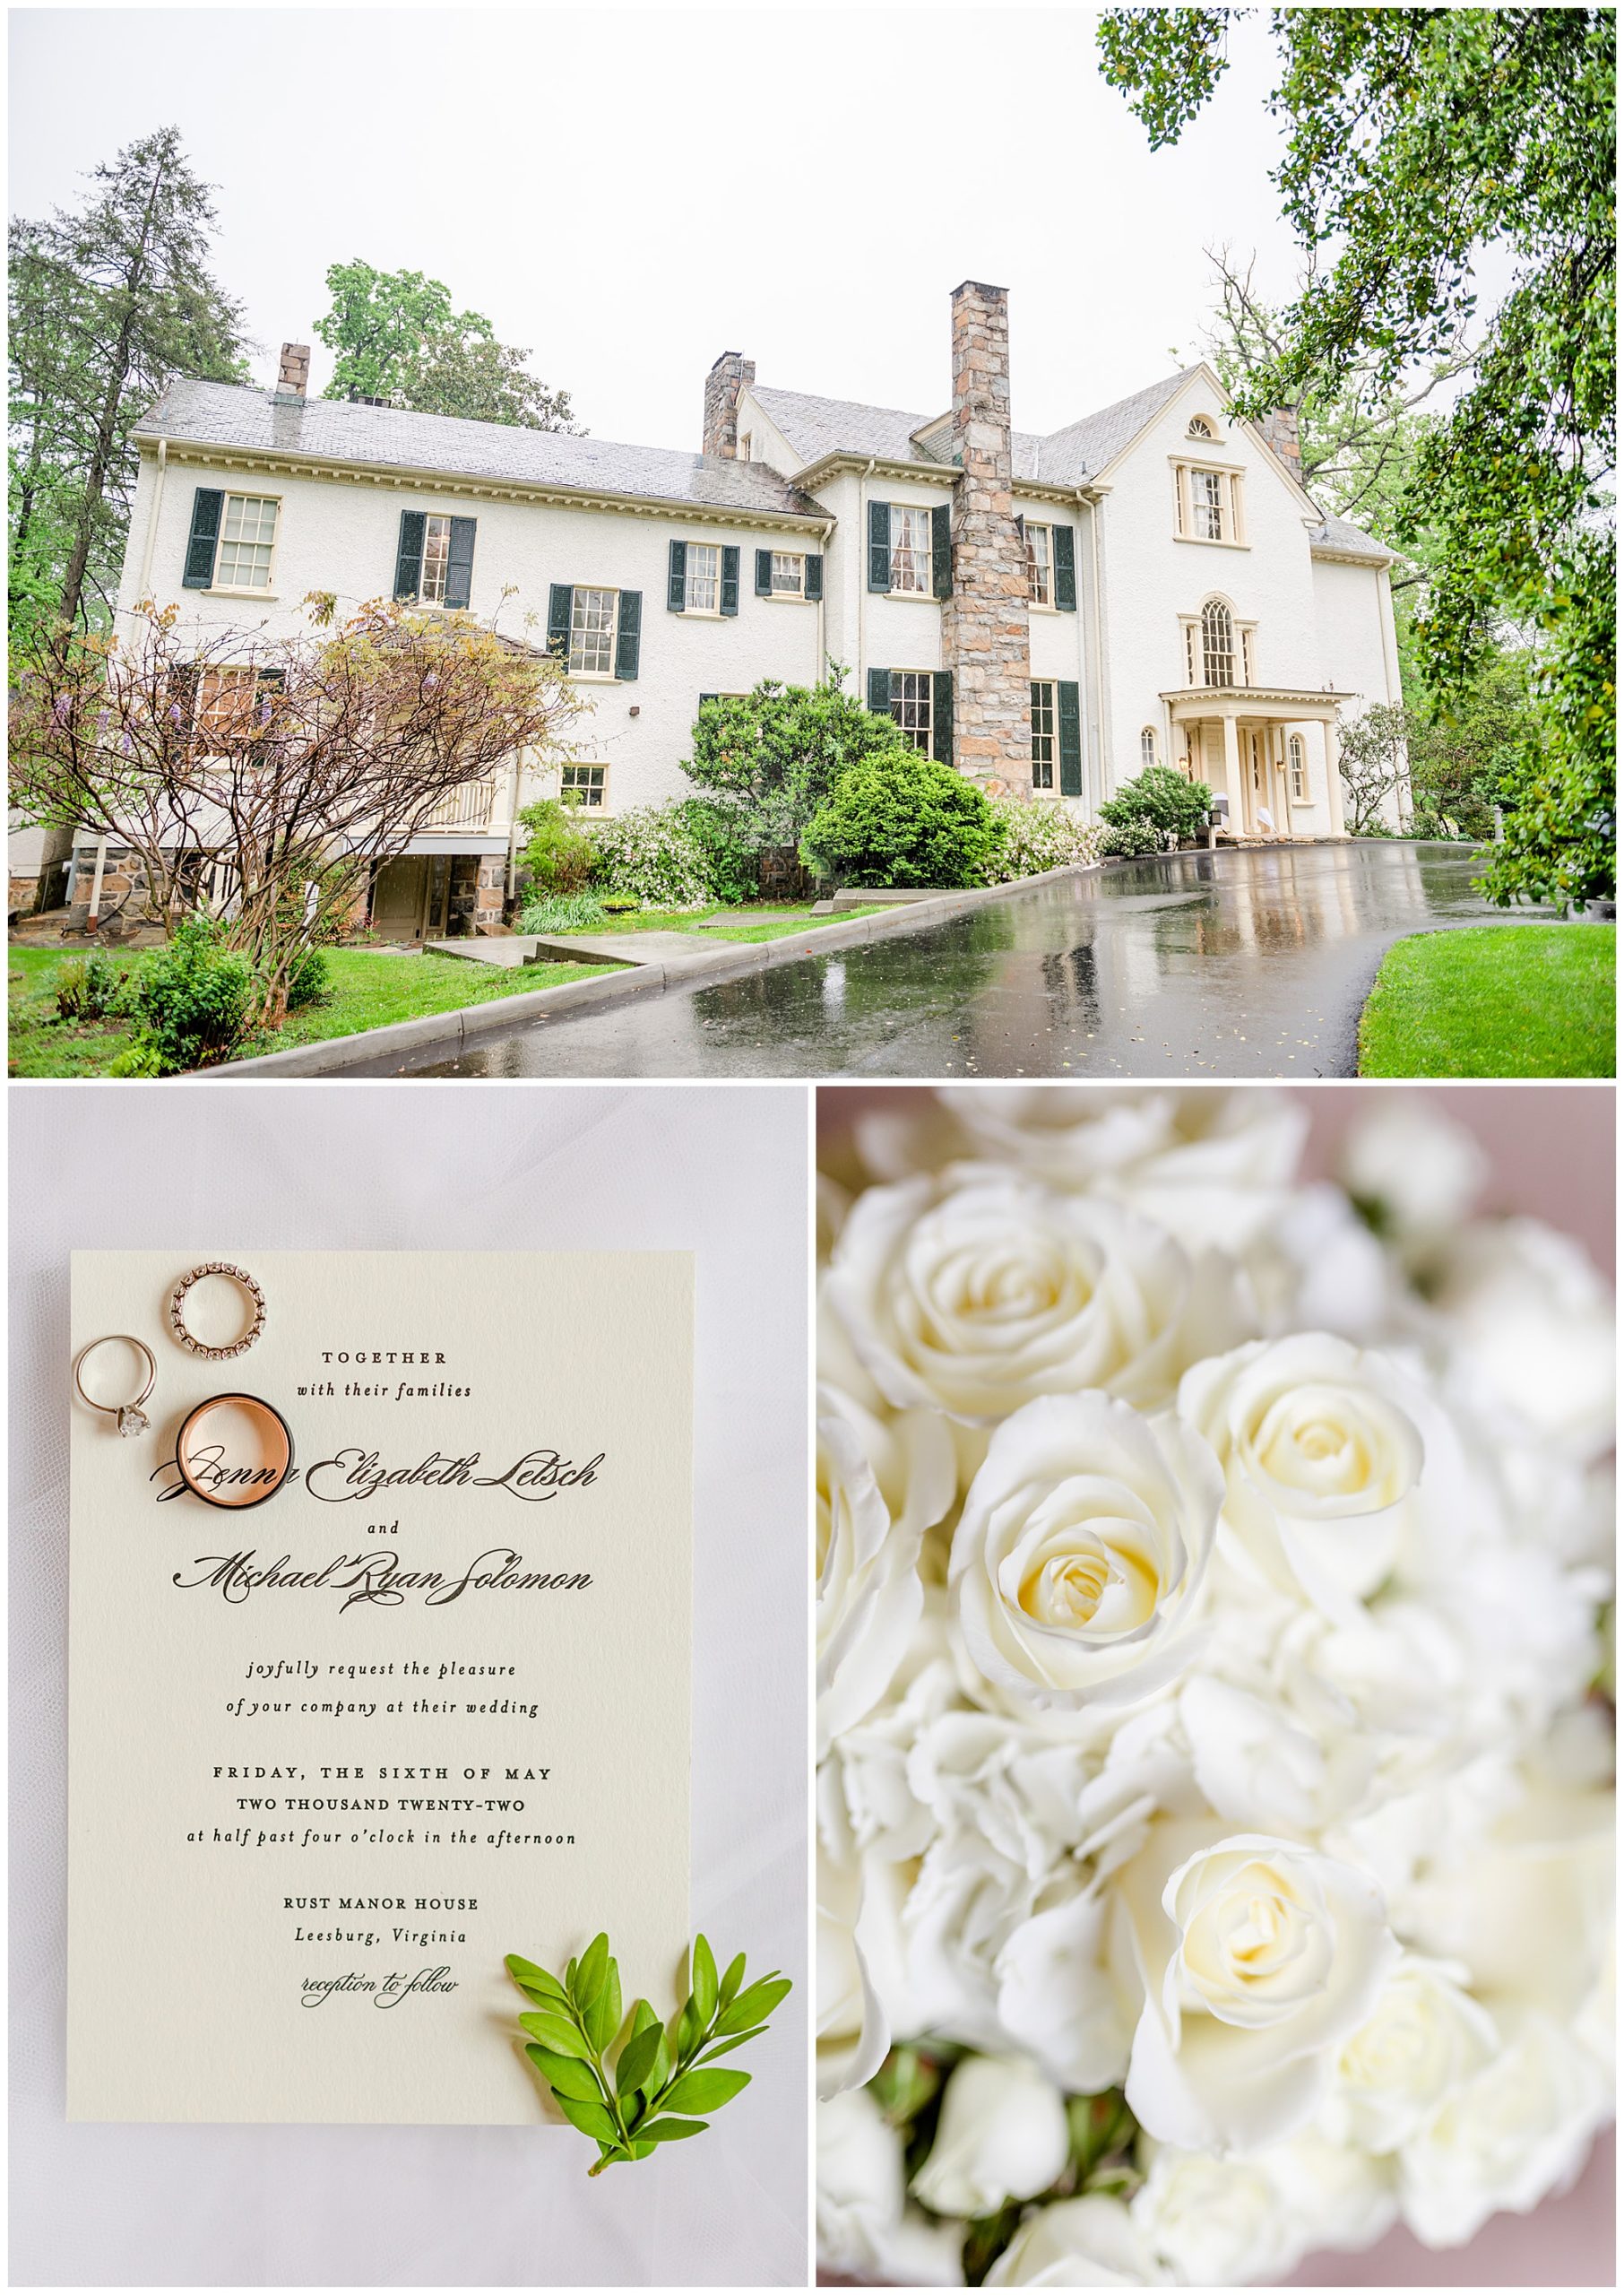 classic Rust Manor House wedding, sprig wedding, black and white aesthetic, classic wedding aesthetic, White Pumpkin Weddings City Tavern Club wedding, Leesburg wedding, Leesbur bride, manor house wedding, classic DC wedding, northern Virginia wedding venue, classic wedding venue, Washington DC wedding photographer, Rachel E.H. Photography, driveway of manor, wedding rings on invitations, white rose bouquet by Rick's Flowers